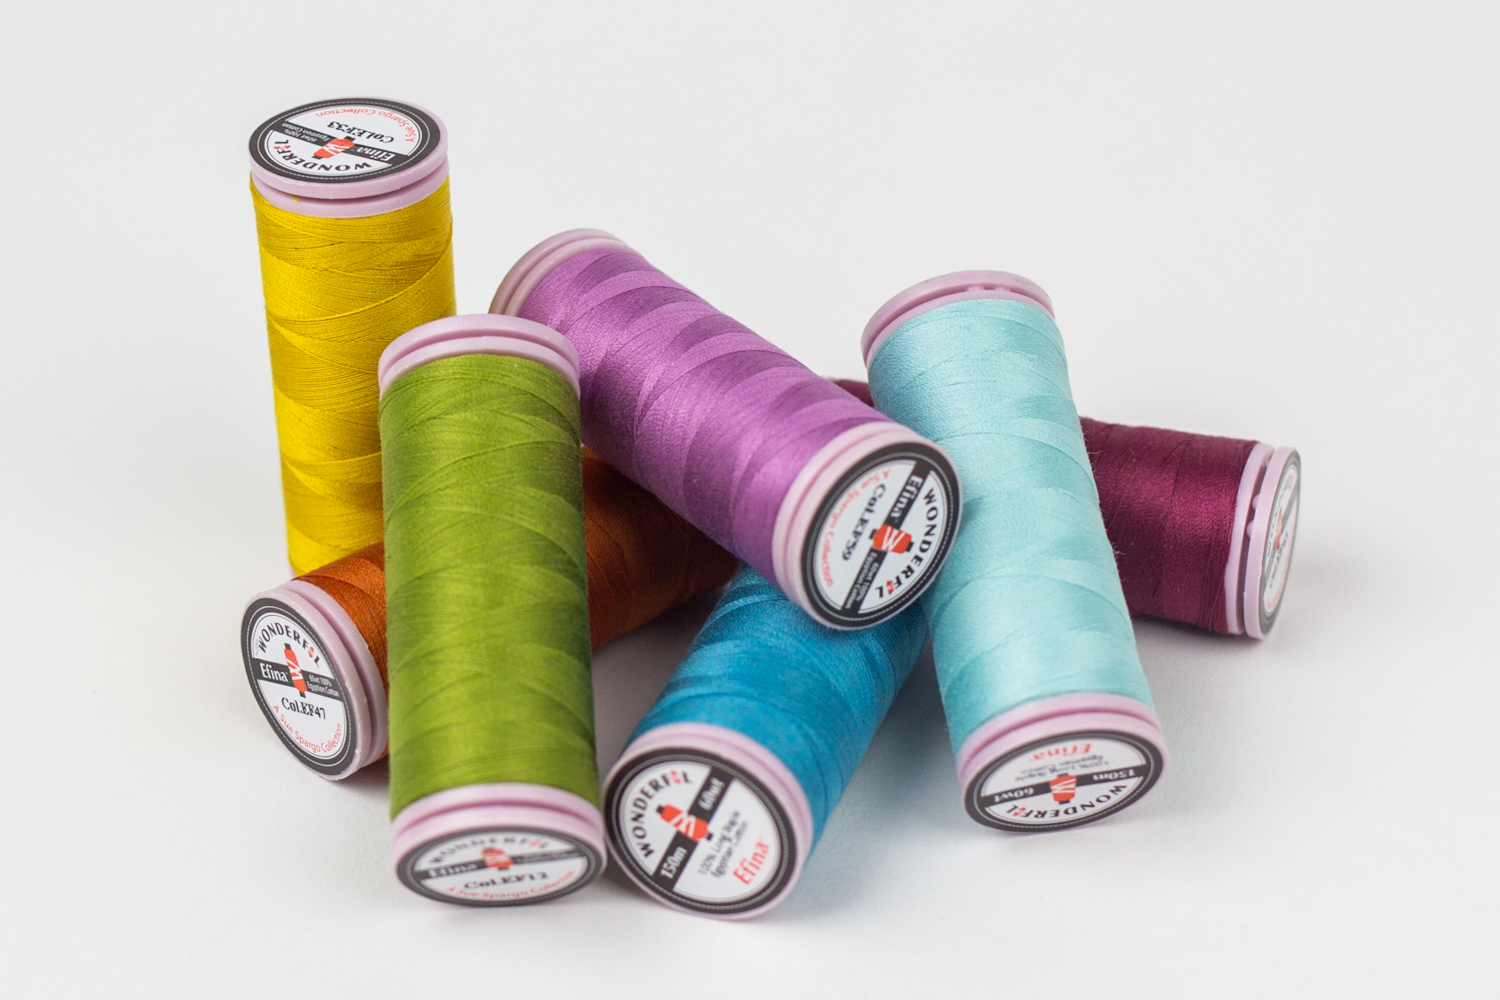 Sue Spargo Lustrous Razzle Rayon Thread Pacific - Includes 1 Dazzle Set of Six 50yd Spools for Embroidery & Embellishment Size #8 